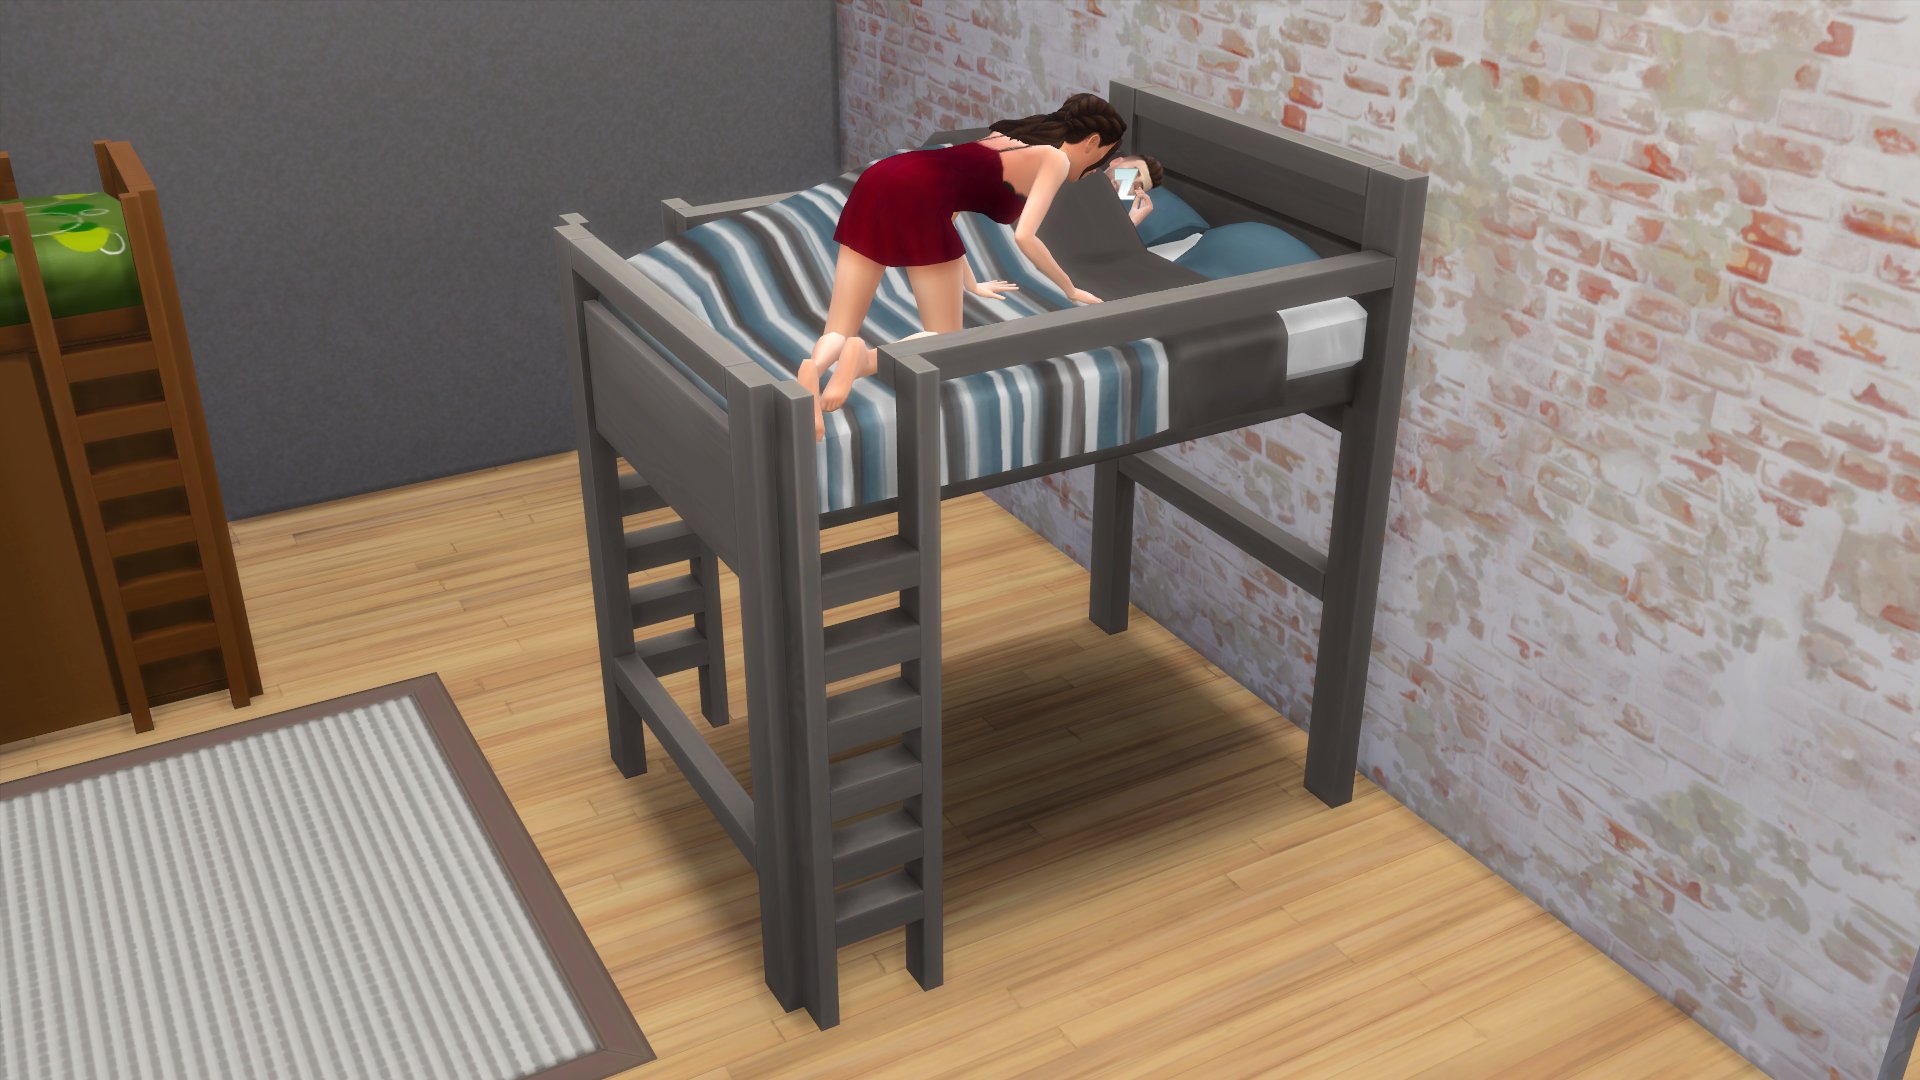 The Sims 4 Double Loft Beds Are Coming, How Do You Make Bunk Beds In Sims 4